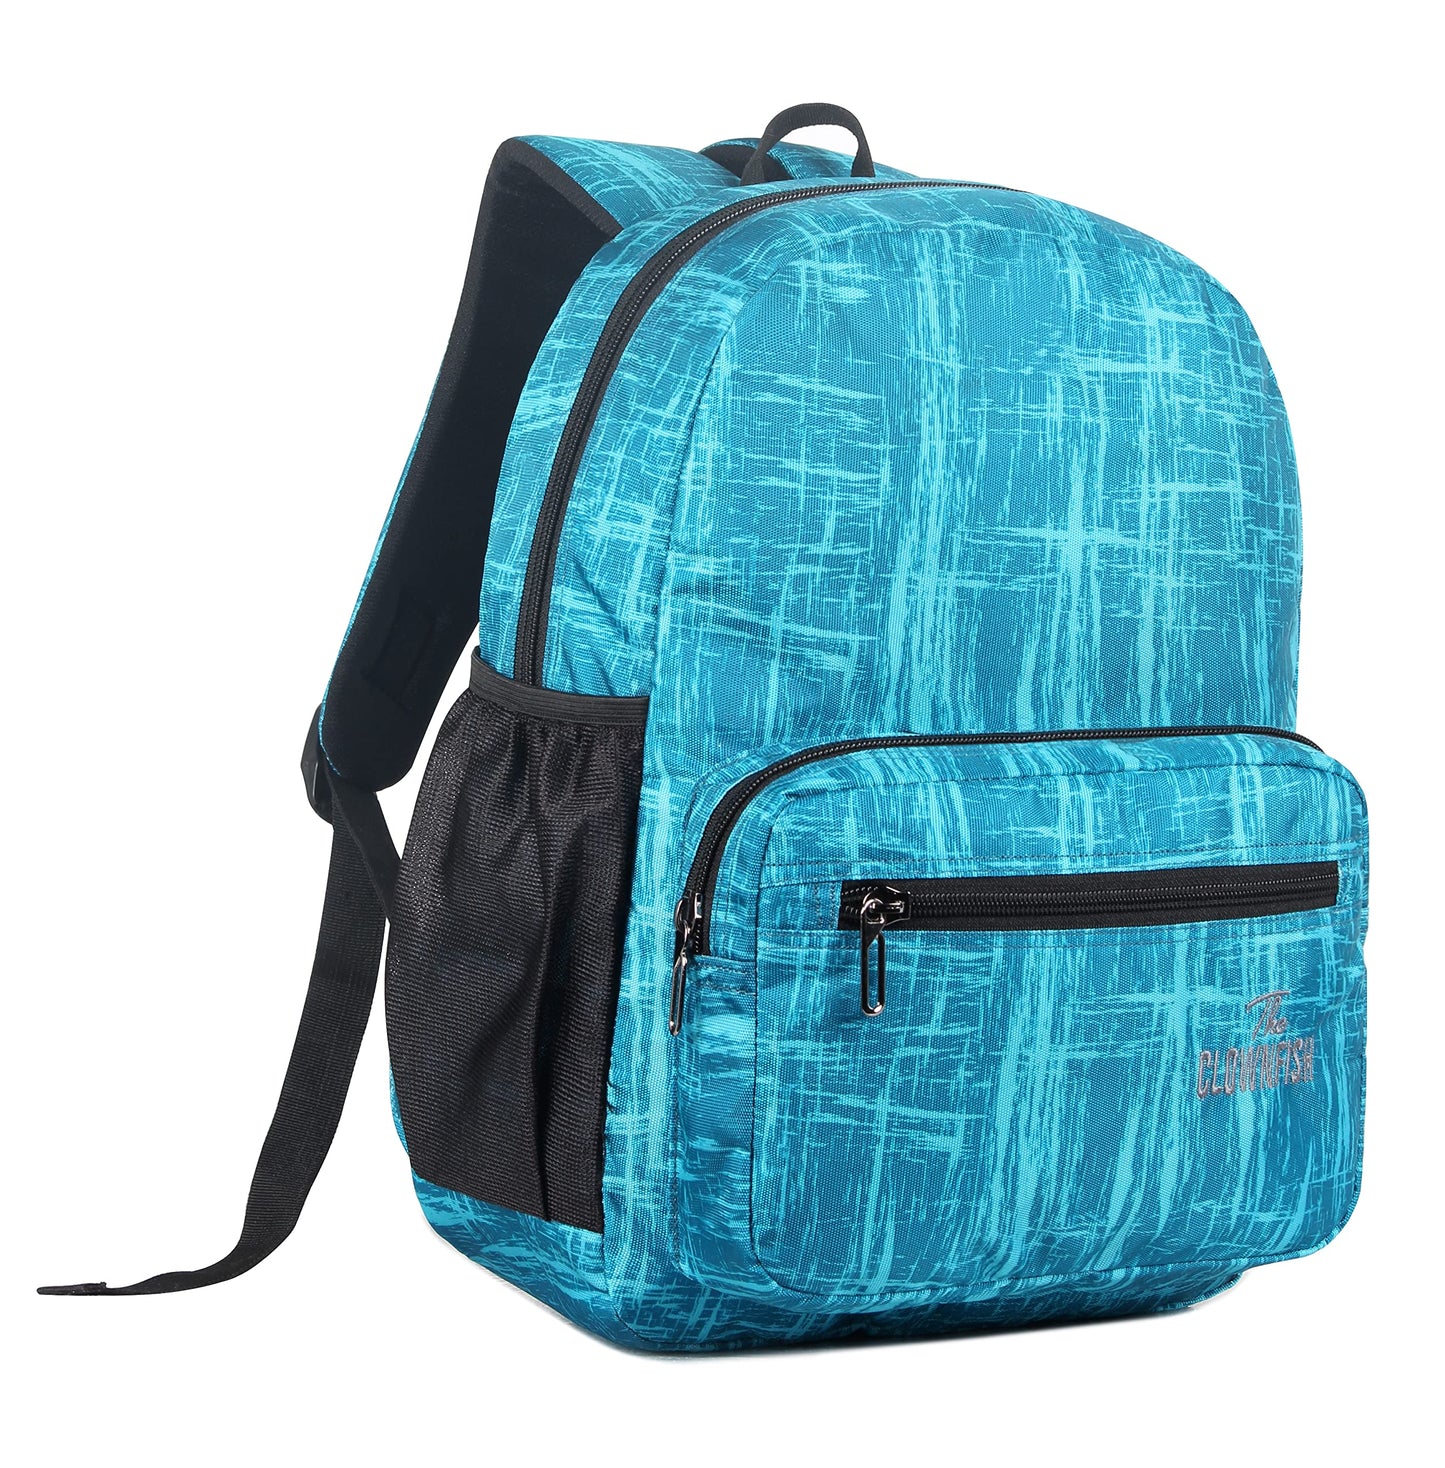 THE CLOWNFISH Marcellus Polyester 21.5 Litres Unisex Travel Laptop Backpack for 14 inch Laptop (Turquoise Blue)